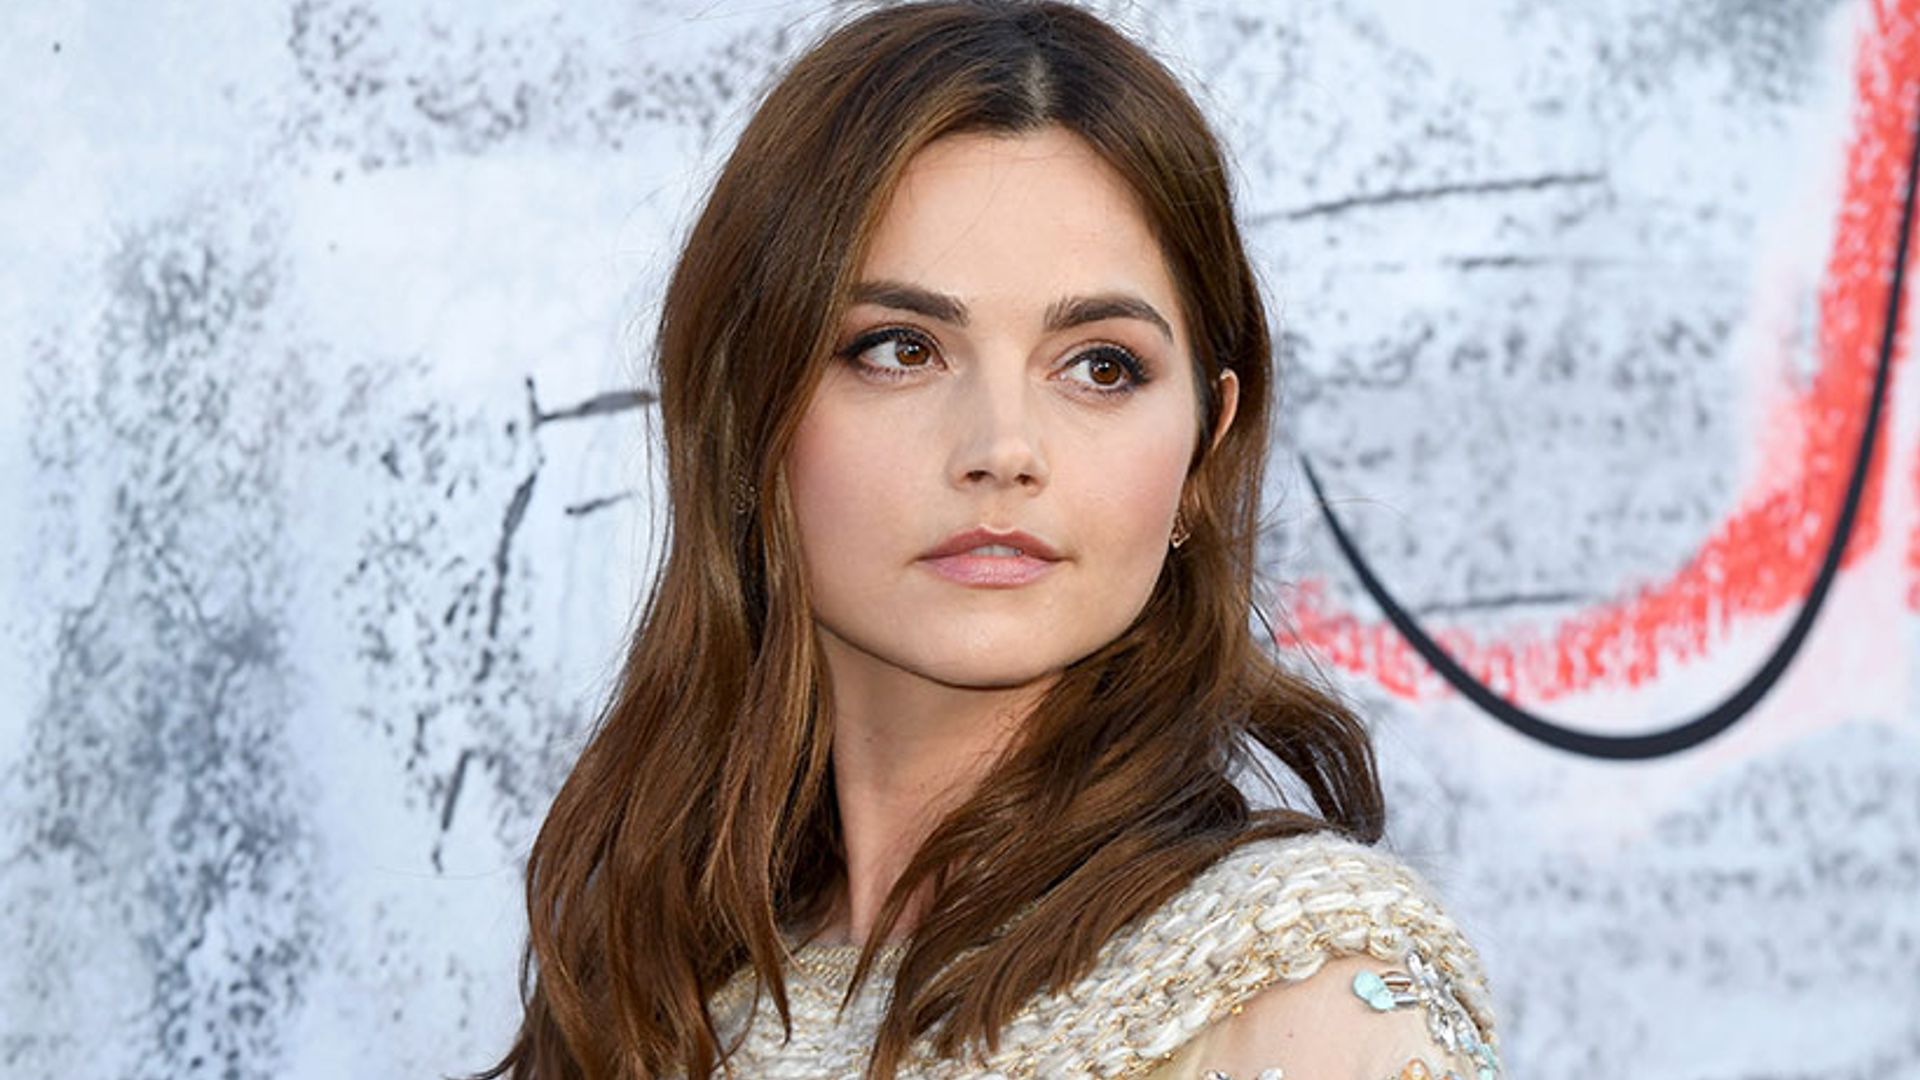 Victoria star Jenna Coleman shows off baby bump in new snap: 'Permanently pregnant'